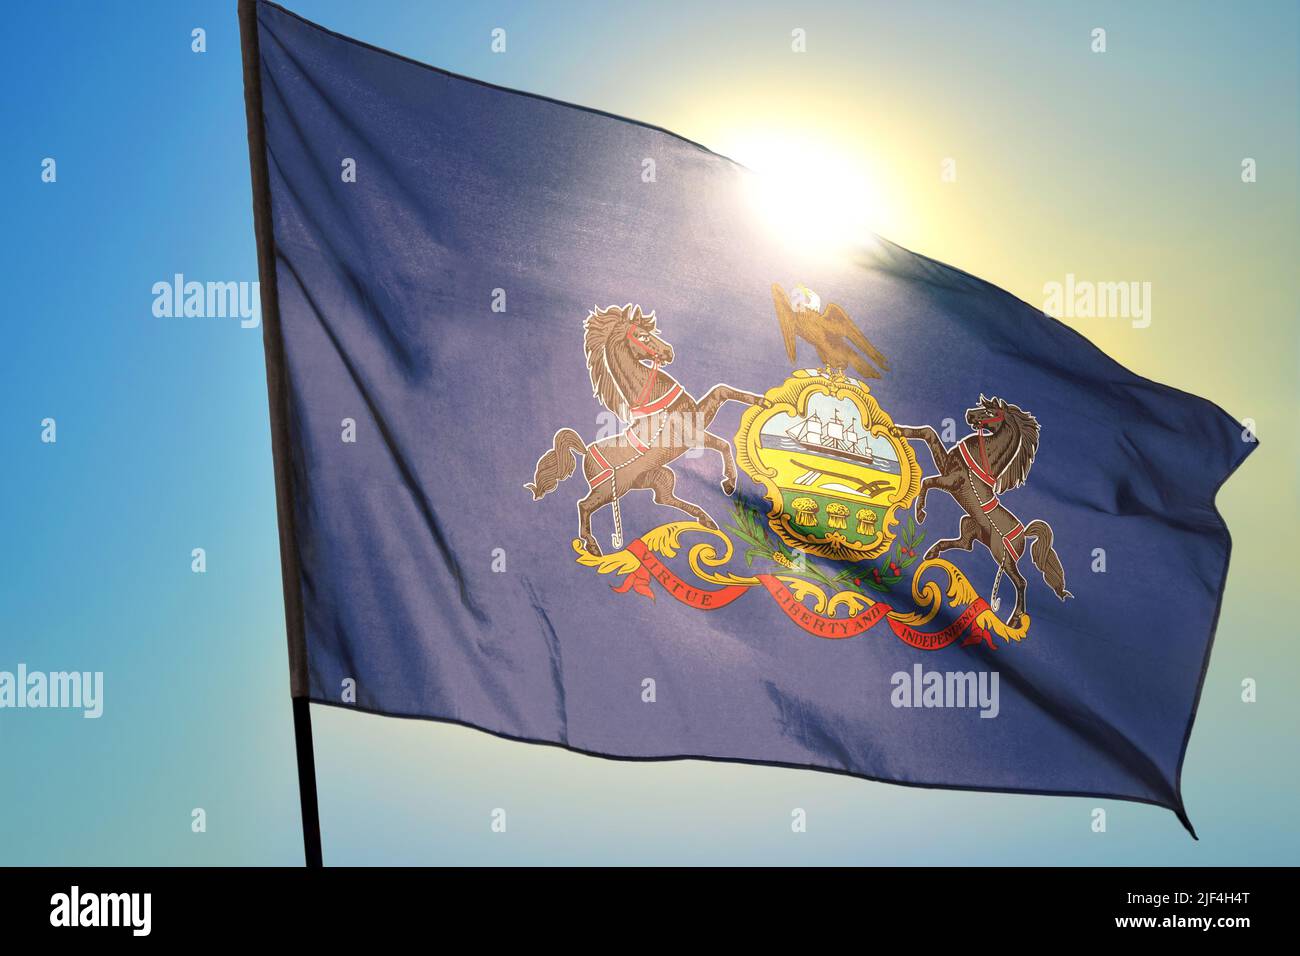 Pennsylvania state of United States flag waving on the wind Stock Photo